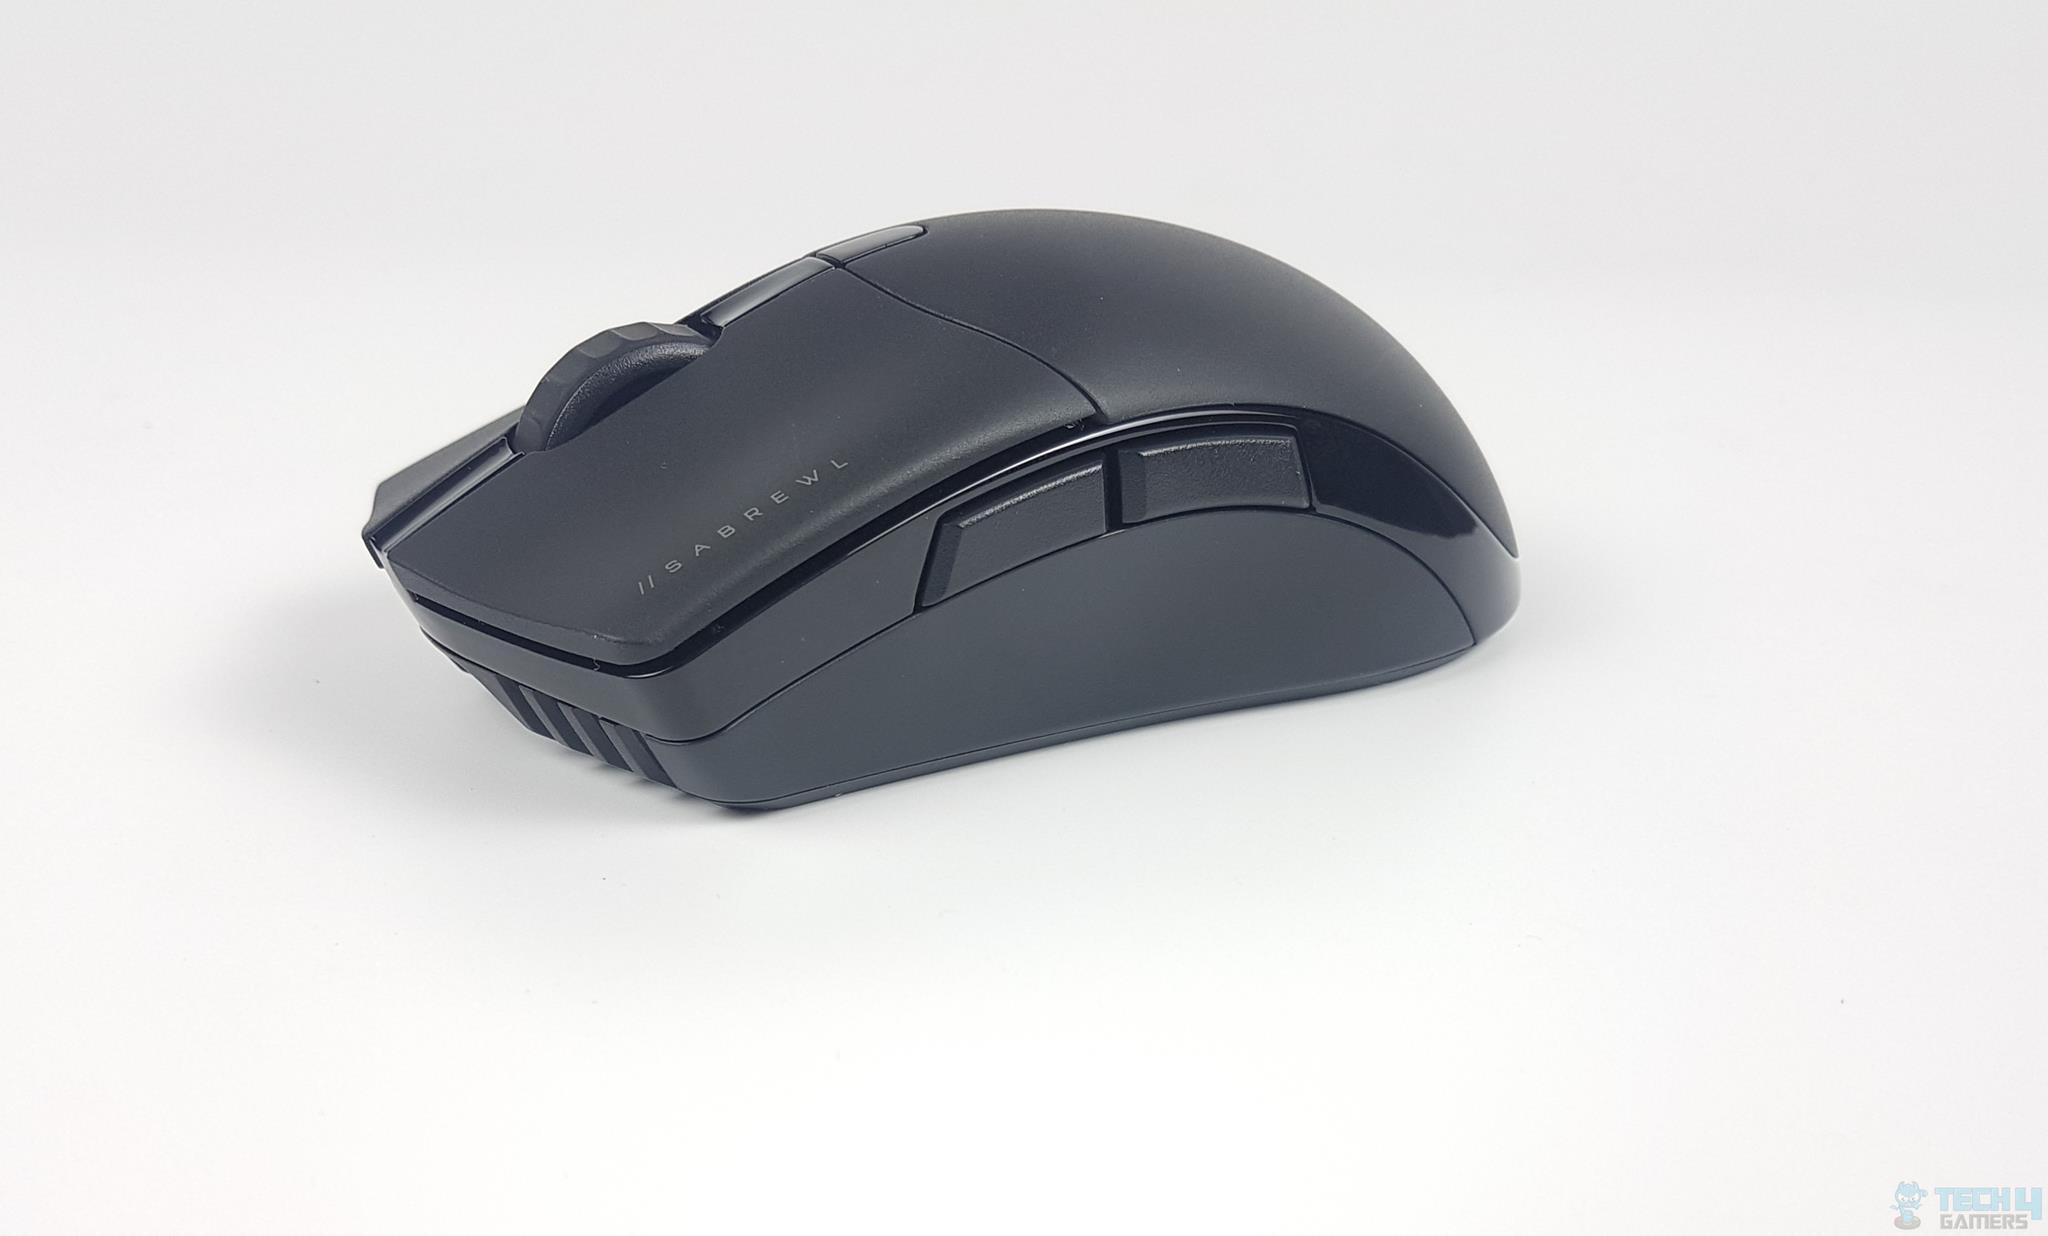 CORSAIR Sabre RGB Pro Wireless Gaming Mouse — The side of the mouse